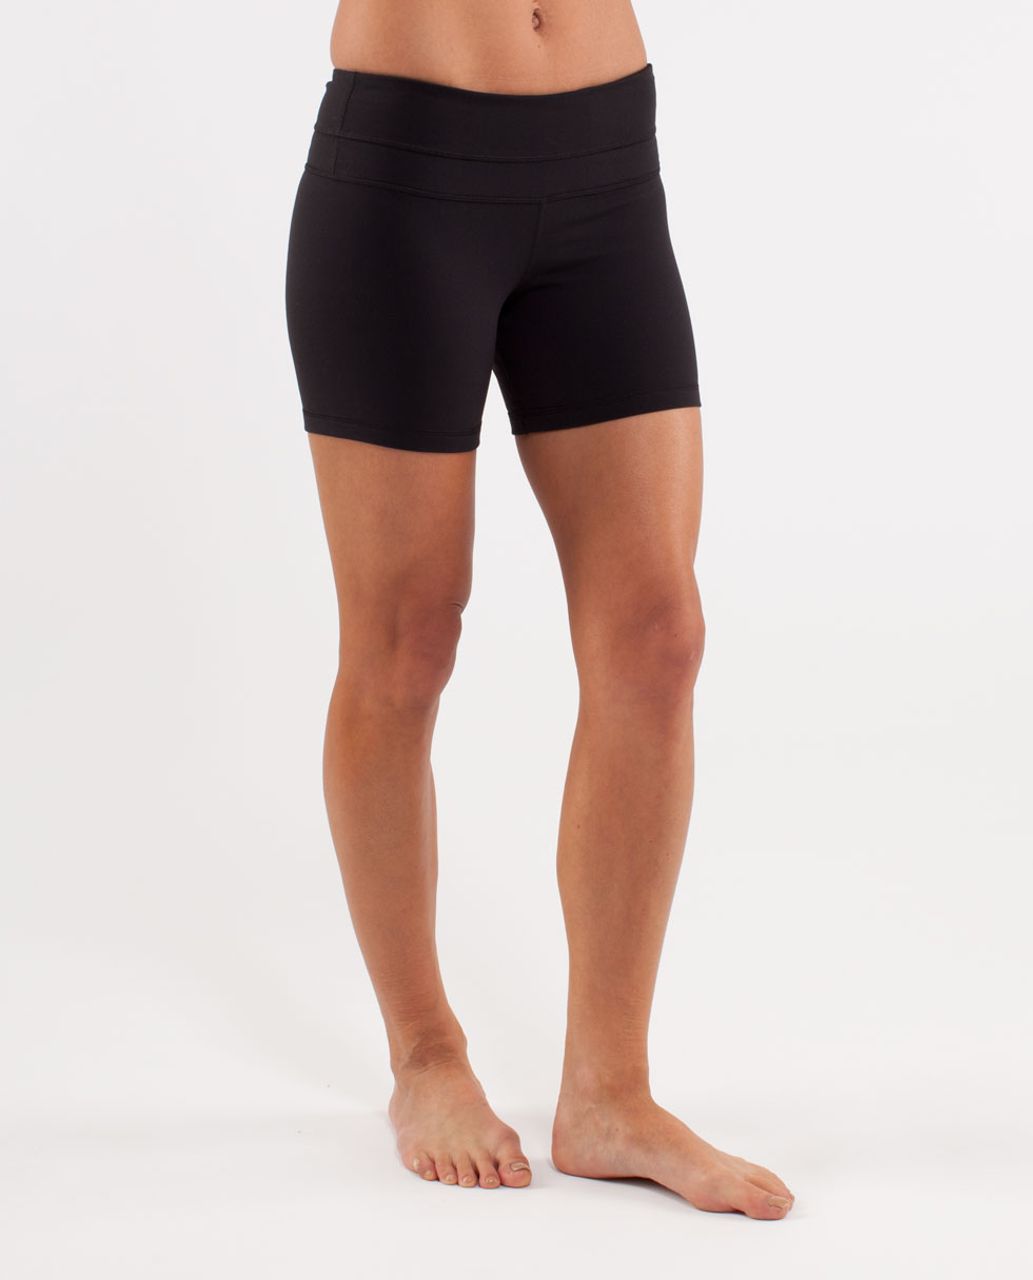 Groove Sport Shorts